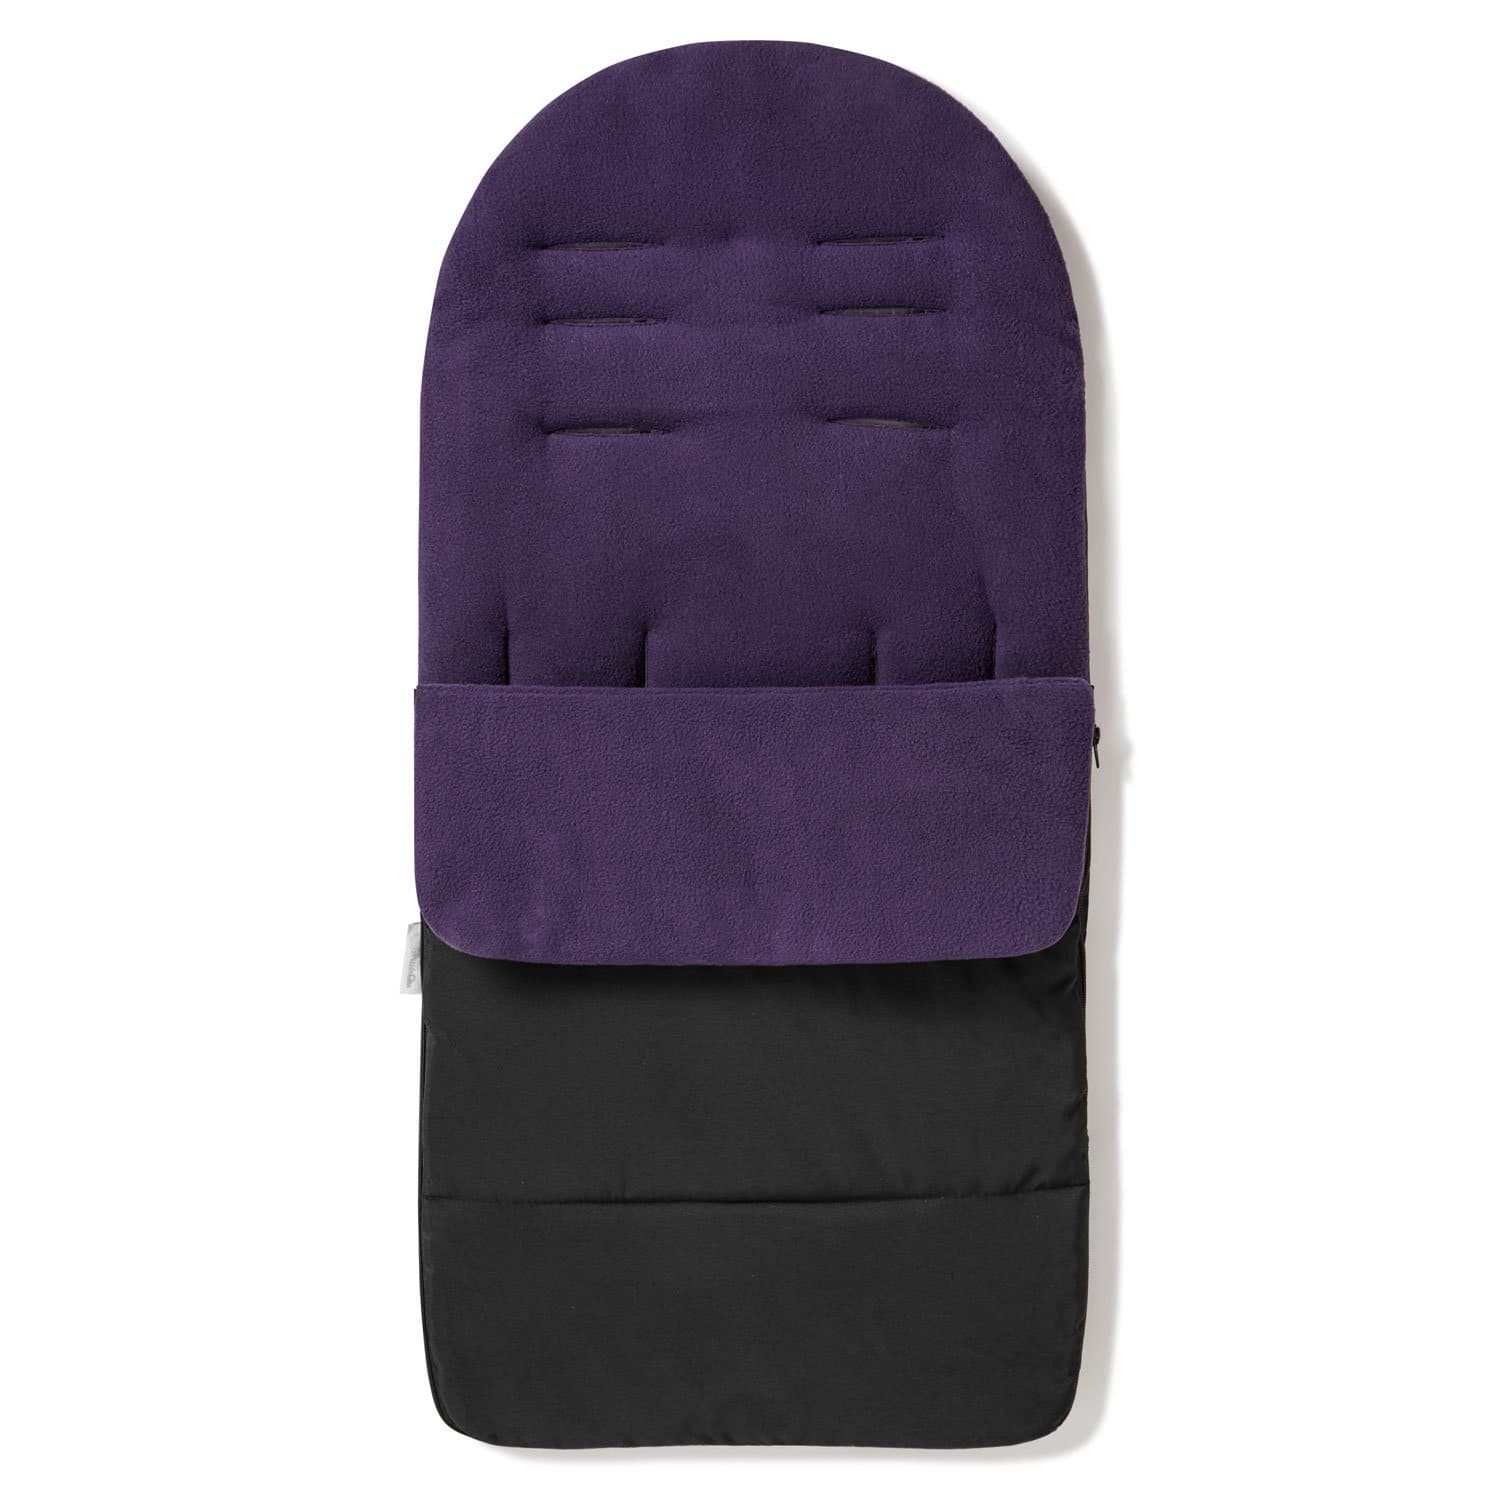 Premium Footmuff / Cosy Toes Compatible with BabyCare - Plum Purple / Fits All Models | For Your Little One